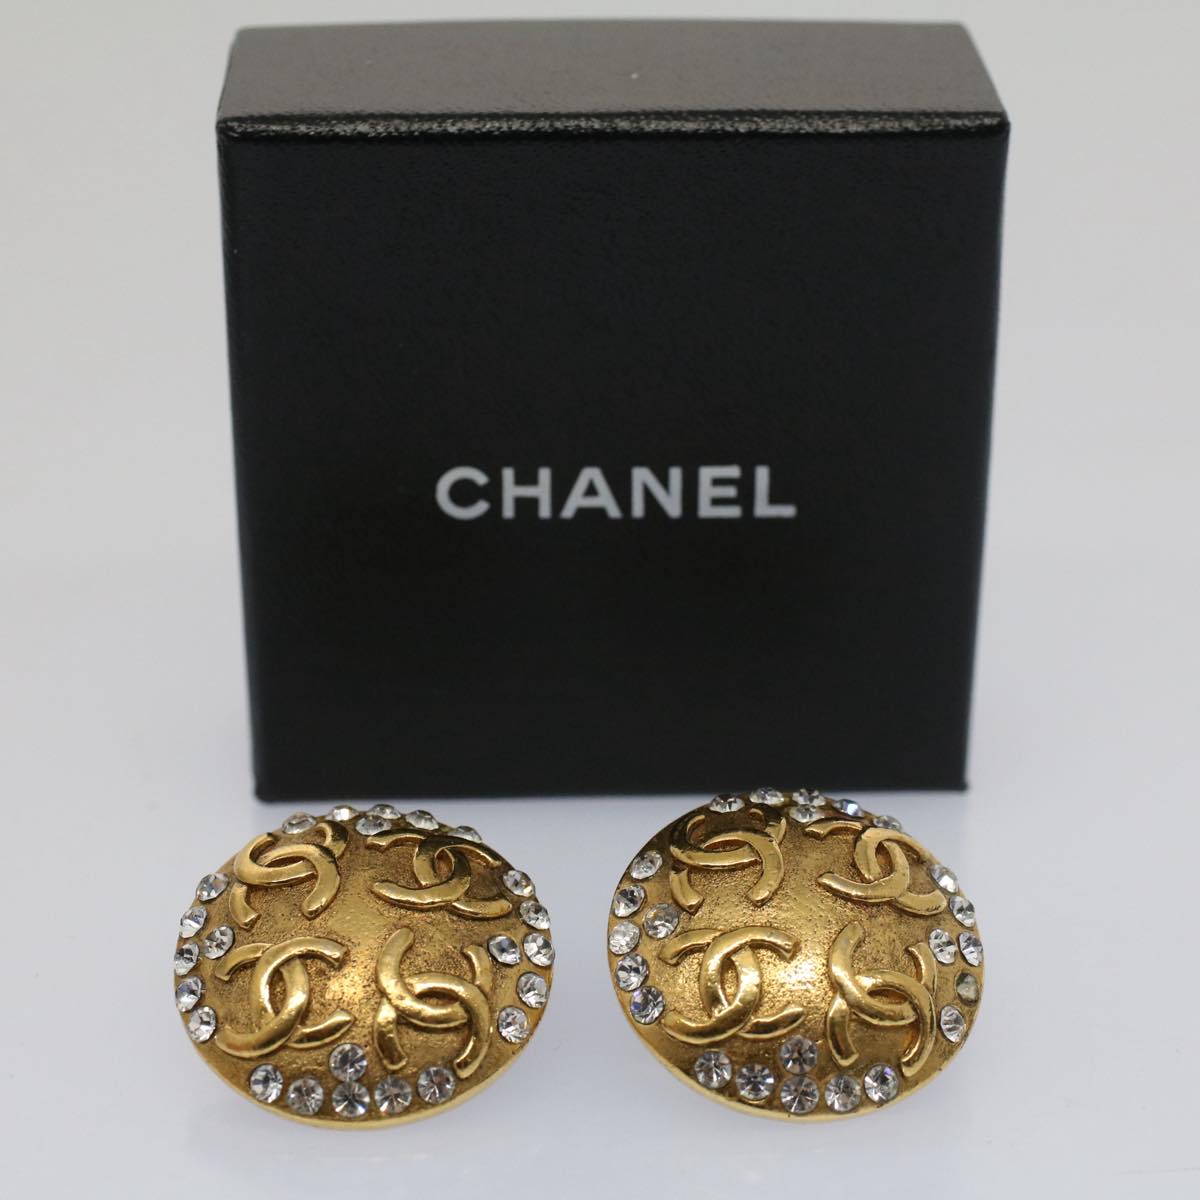 CHANEL Earring Gold Tone CC Auth bs7942